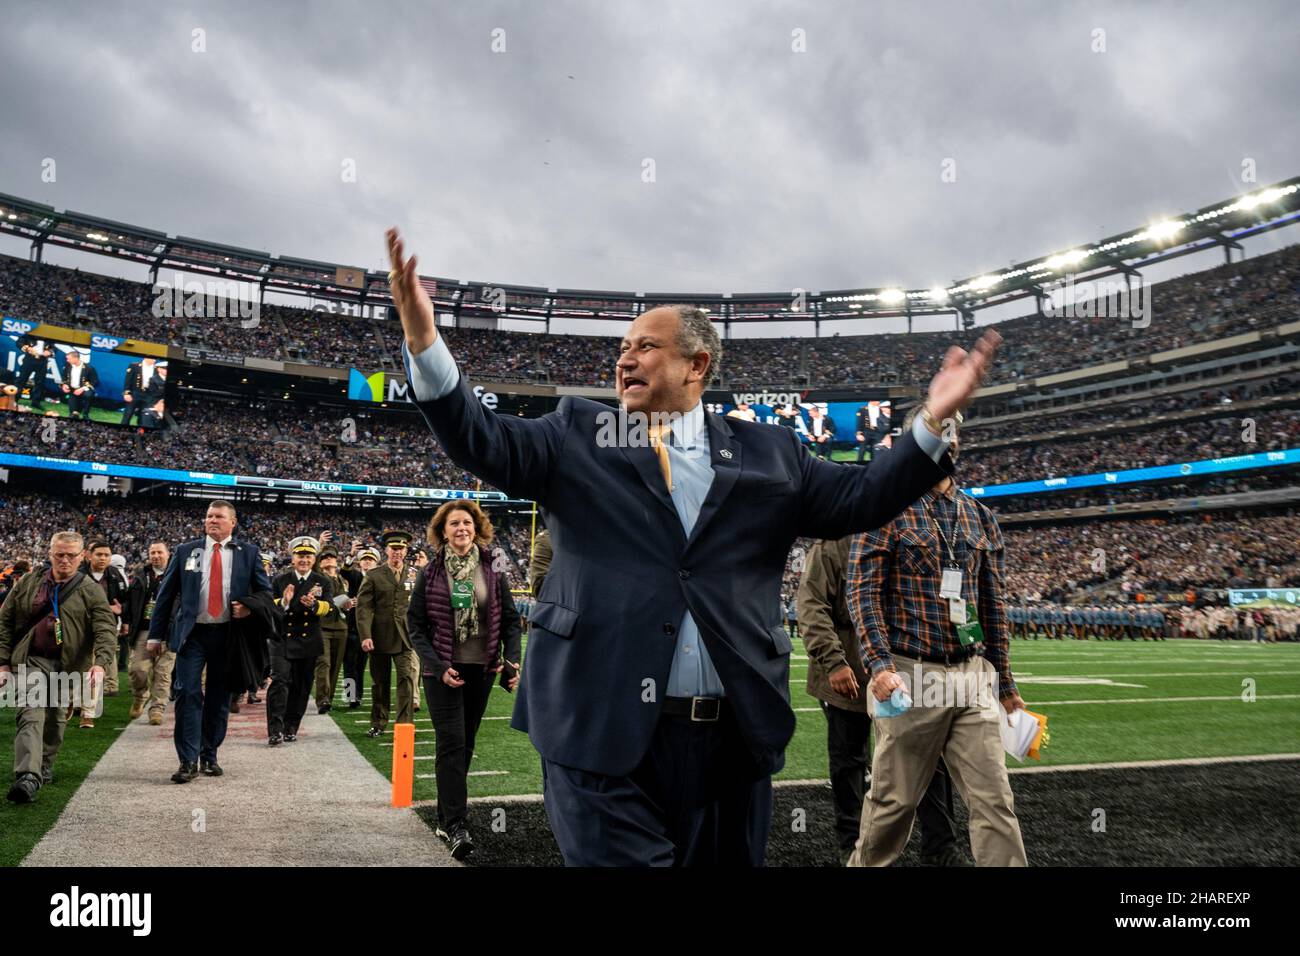 East Rutherford, United States of America. 11 December, 2021. U.S. Secretary of the Navy Carlos Del Toro cheers on the crowd during the start of the annual Army-Navy football game at Metlife Stadium December 11, 2021 in East Rutherford, New Jersey. The U.S. Naval Academy Midshipmen defeated the Army Black Knights 17-13 in their 122nd matchup.  Credit: MC2 Logan Keown/U.S. Navy Photo/Alamy Live News Stock Photo